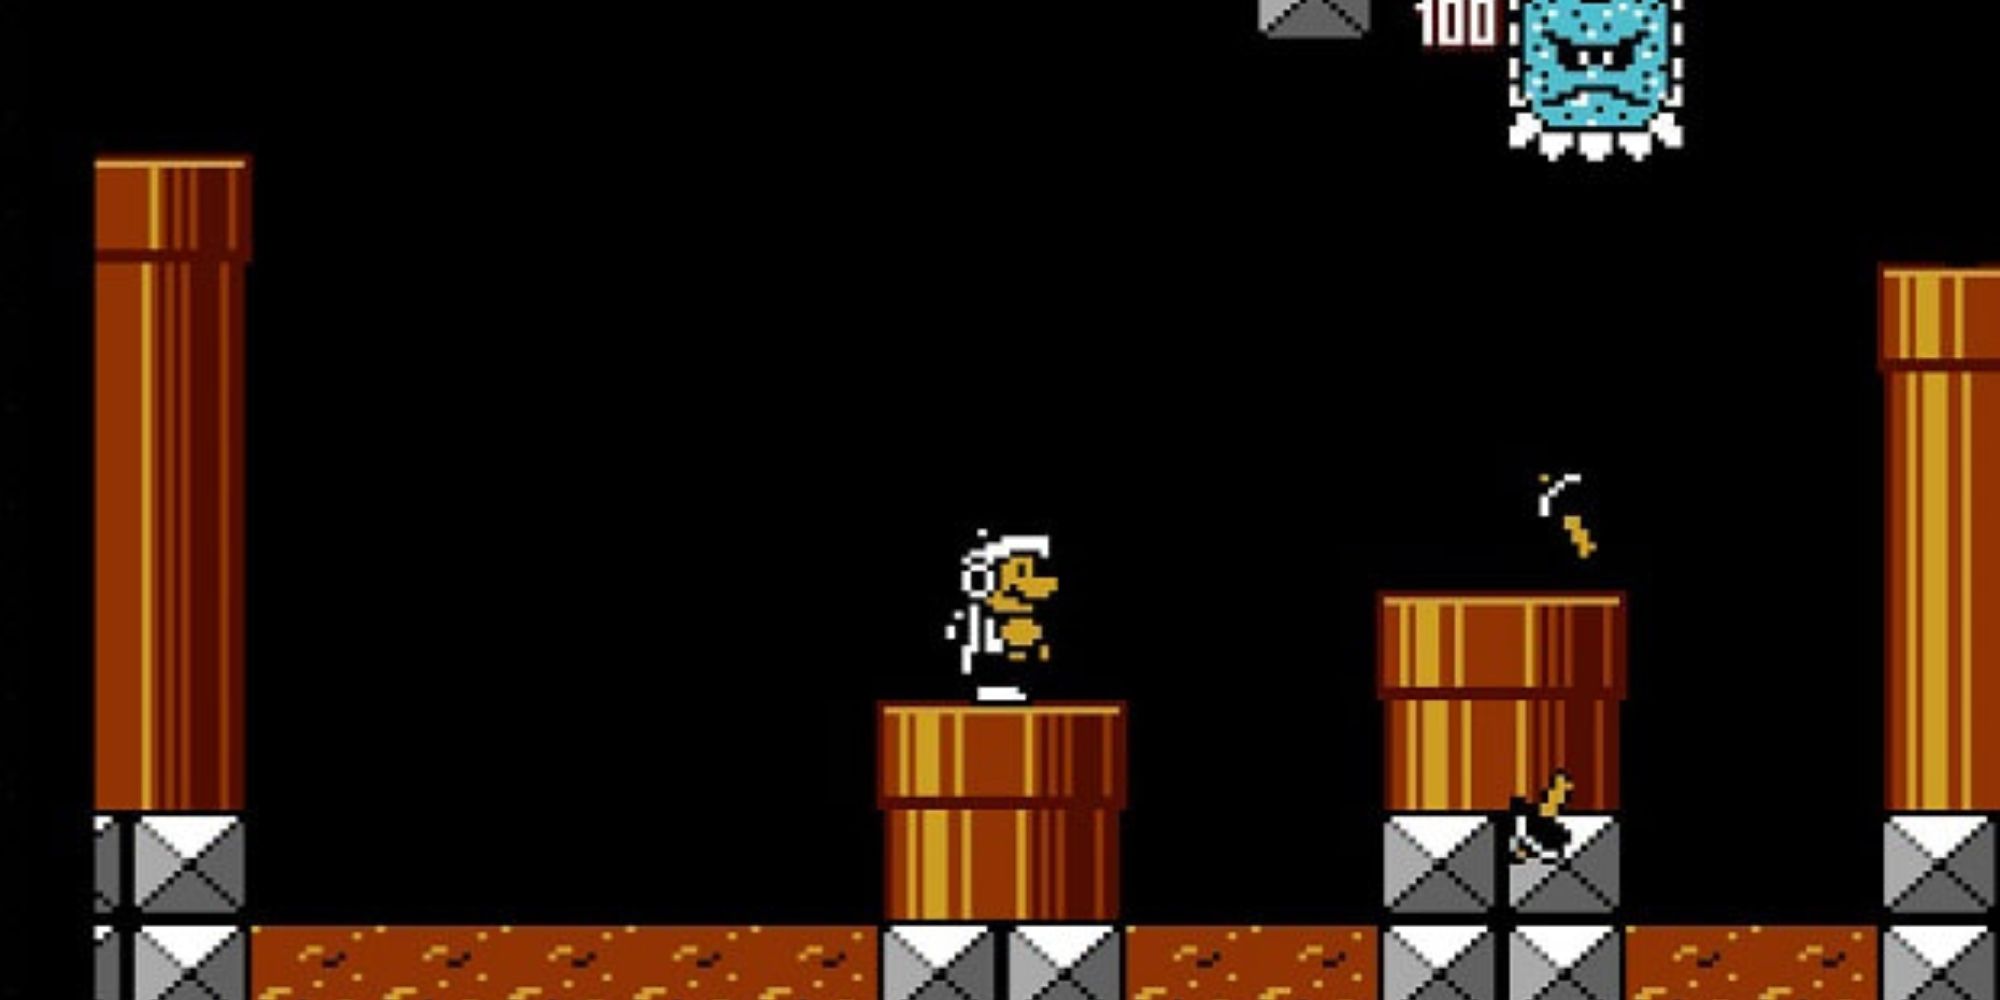 Hammer Mario in a Bowser level